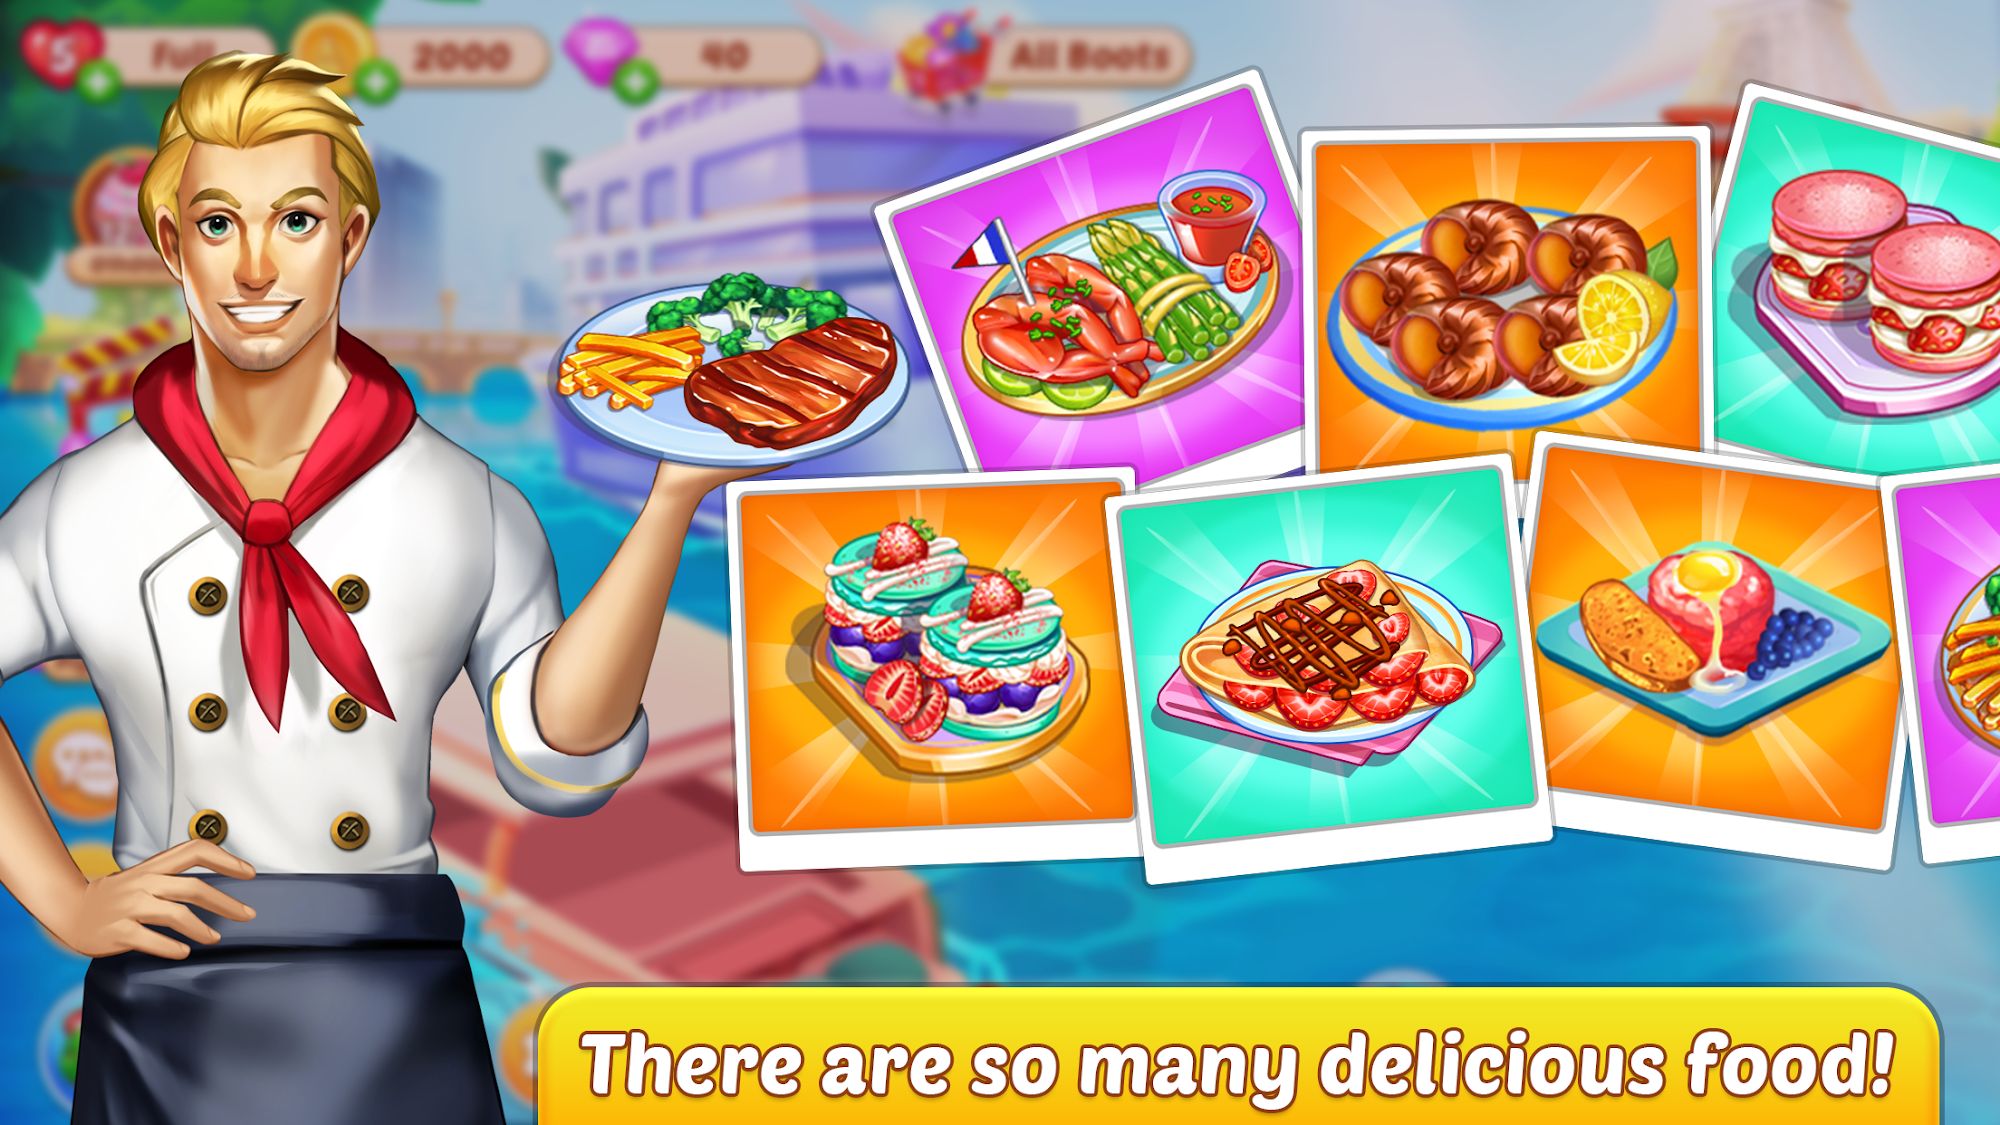 Cooking Trendy - Android game screenshots.